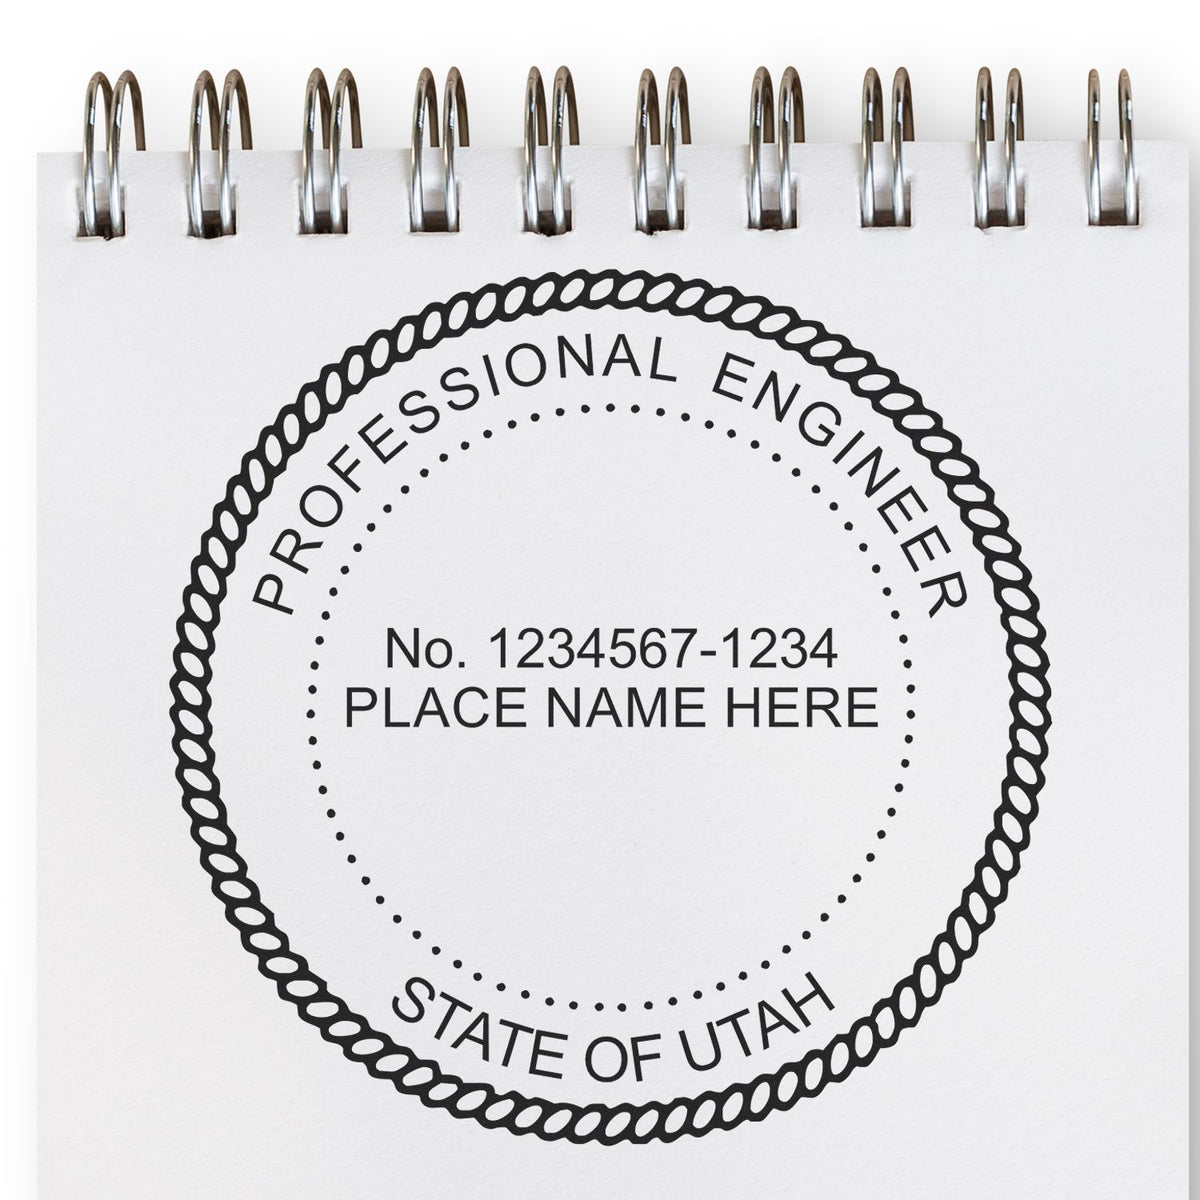 A lifestyle photo showing a stamped image of the Digital Utah PE Stamp and Electronic Seal for Utah Engineer on a piece of paper